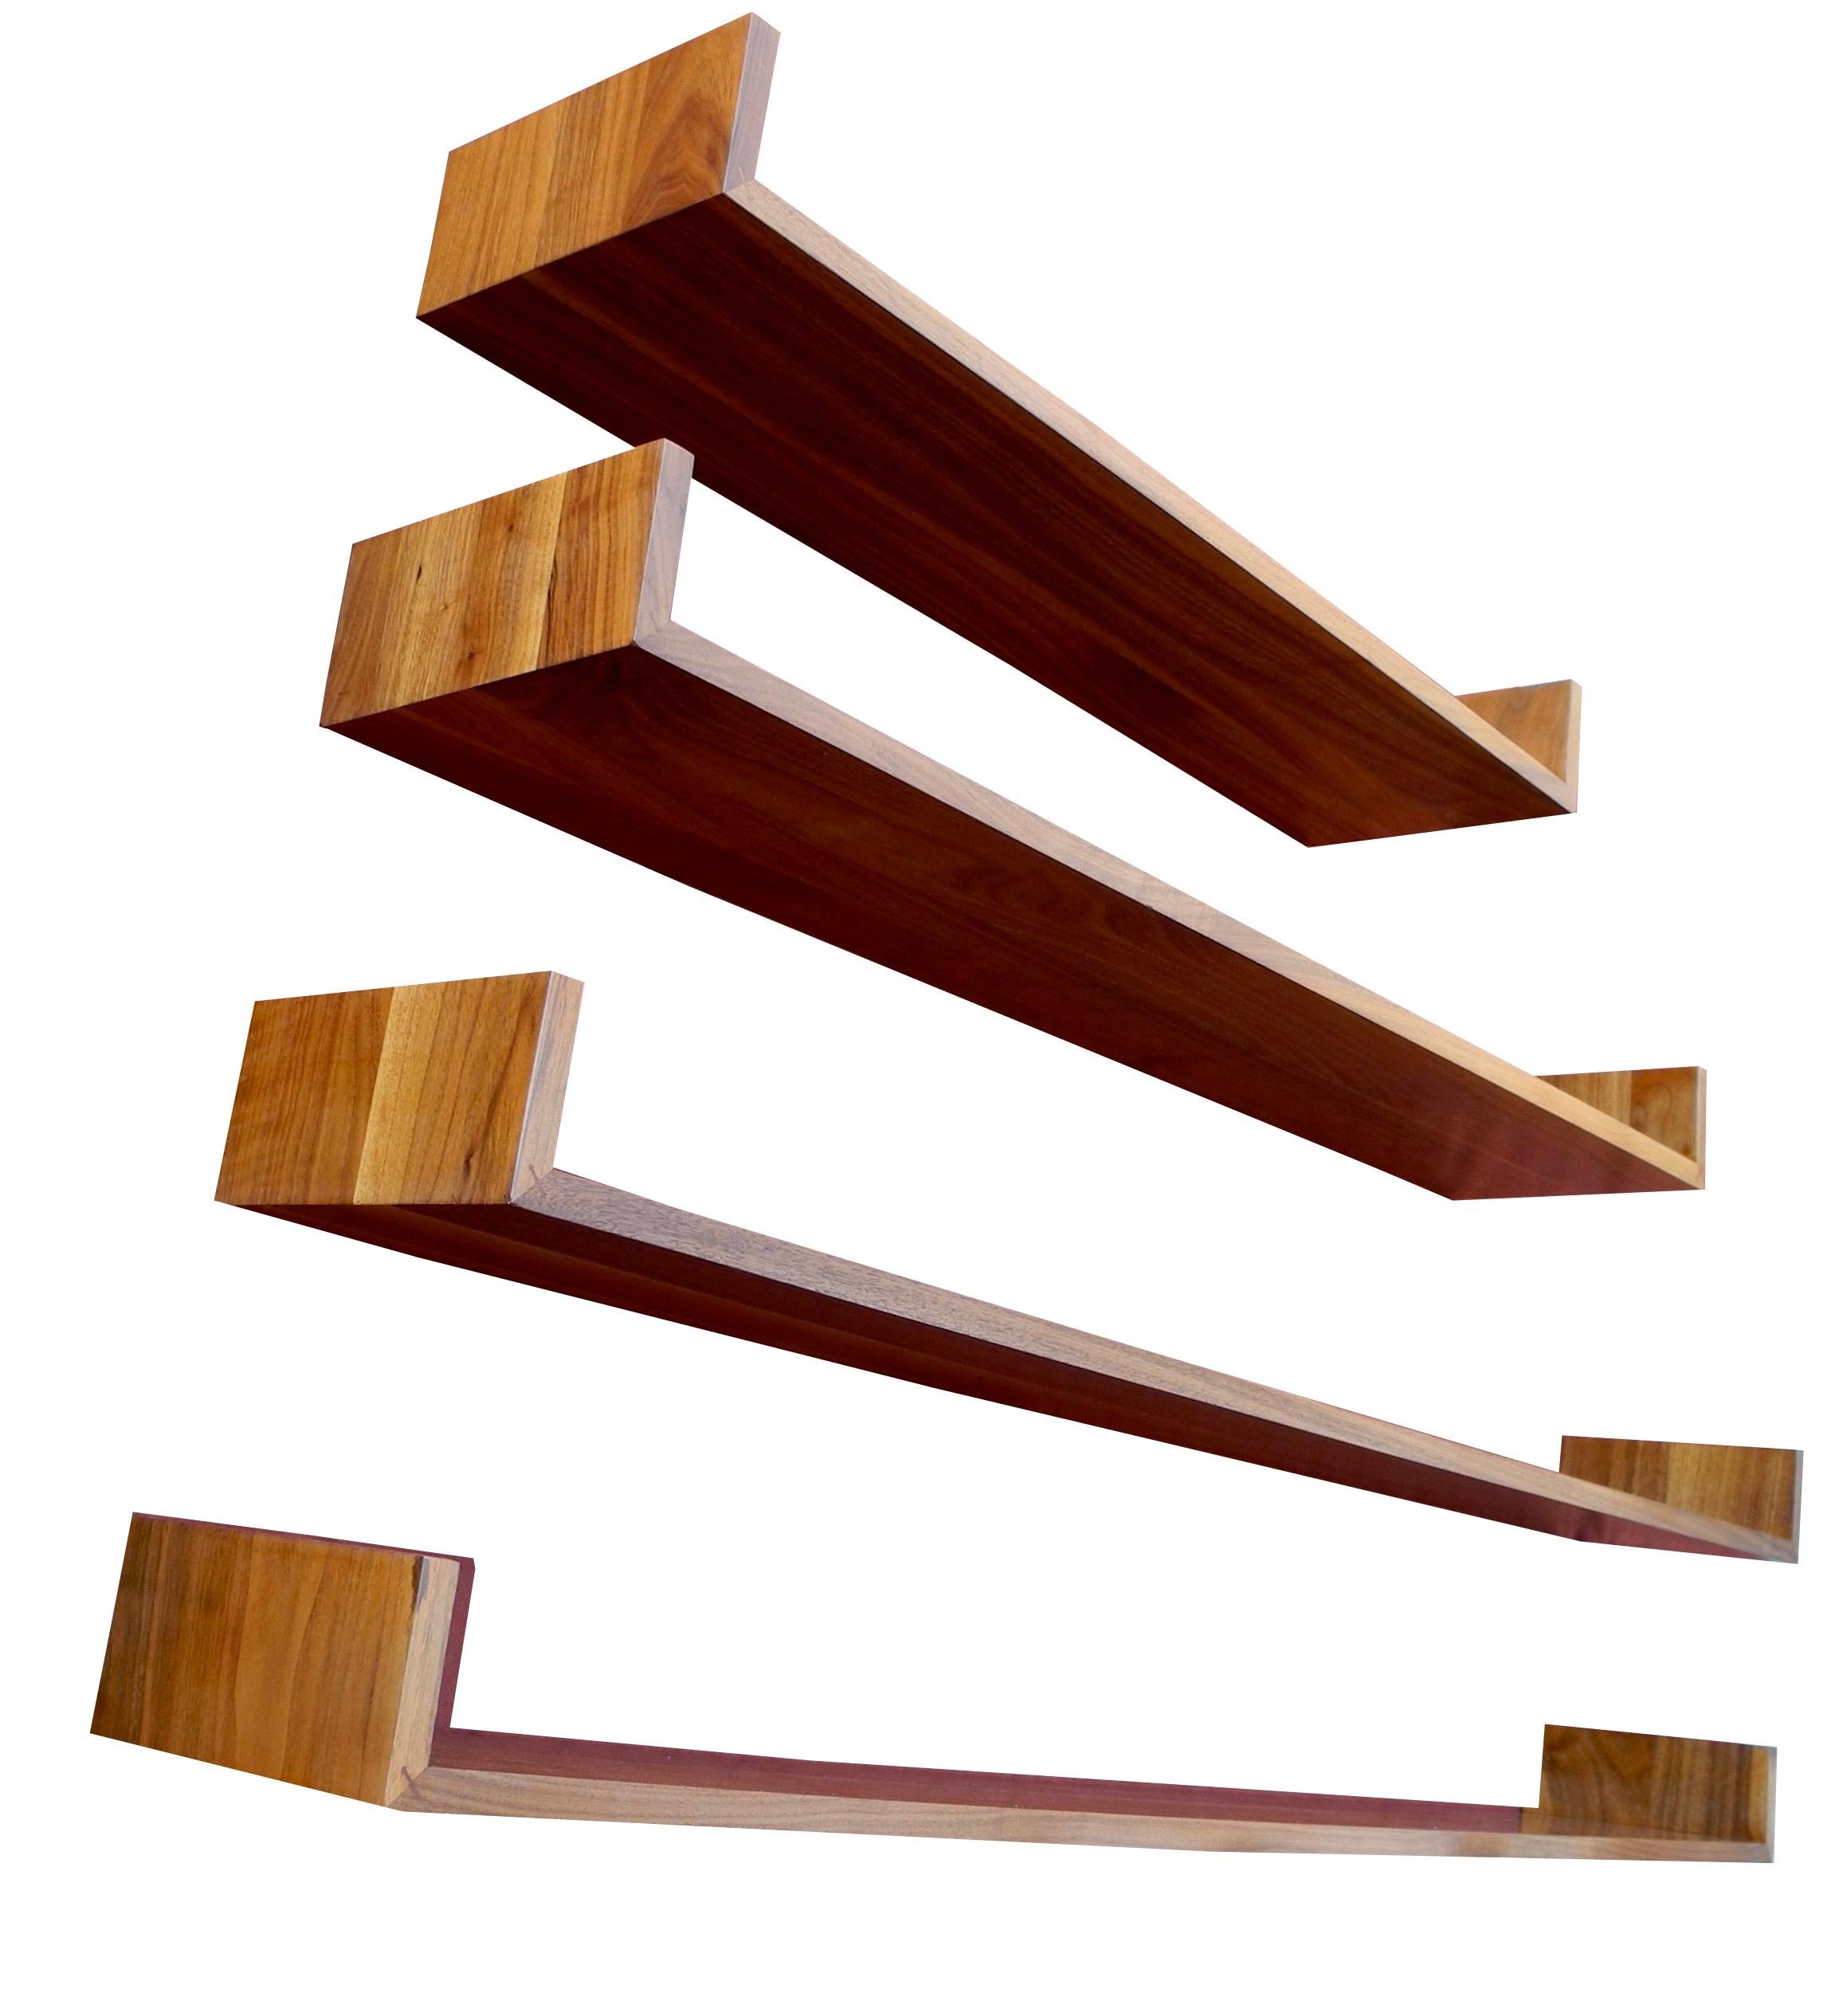 This handsome set of modern walnut hanging shelves can be placed at any height on your wall. Designed by Mel Smilow, they create a floating affect on the wall. Strong enough for books. This set contains two shelves at 60 